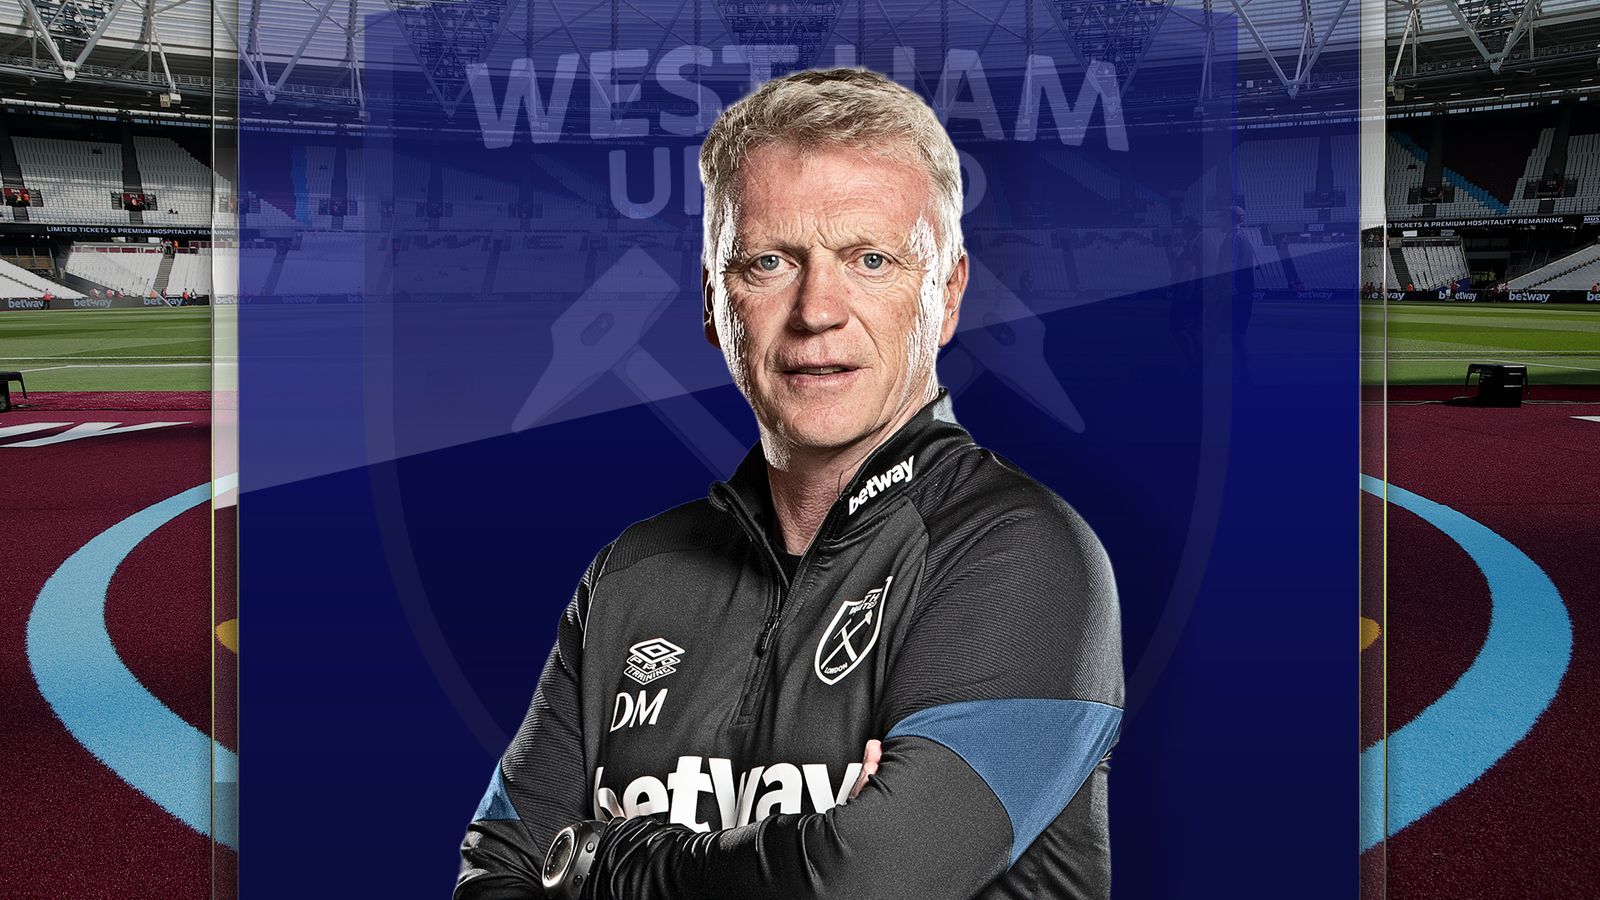 david-moyes-exclusive-west-ham-boss-on-big-six-record-his-side-s-journey-and-targeting-away-improvements